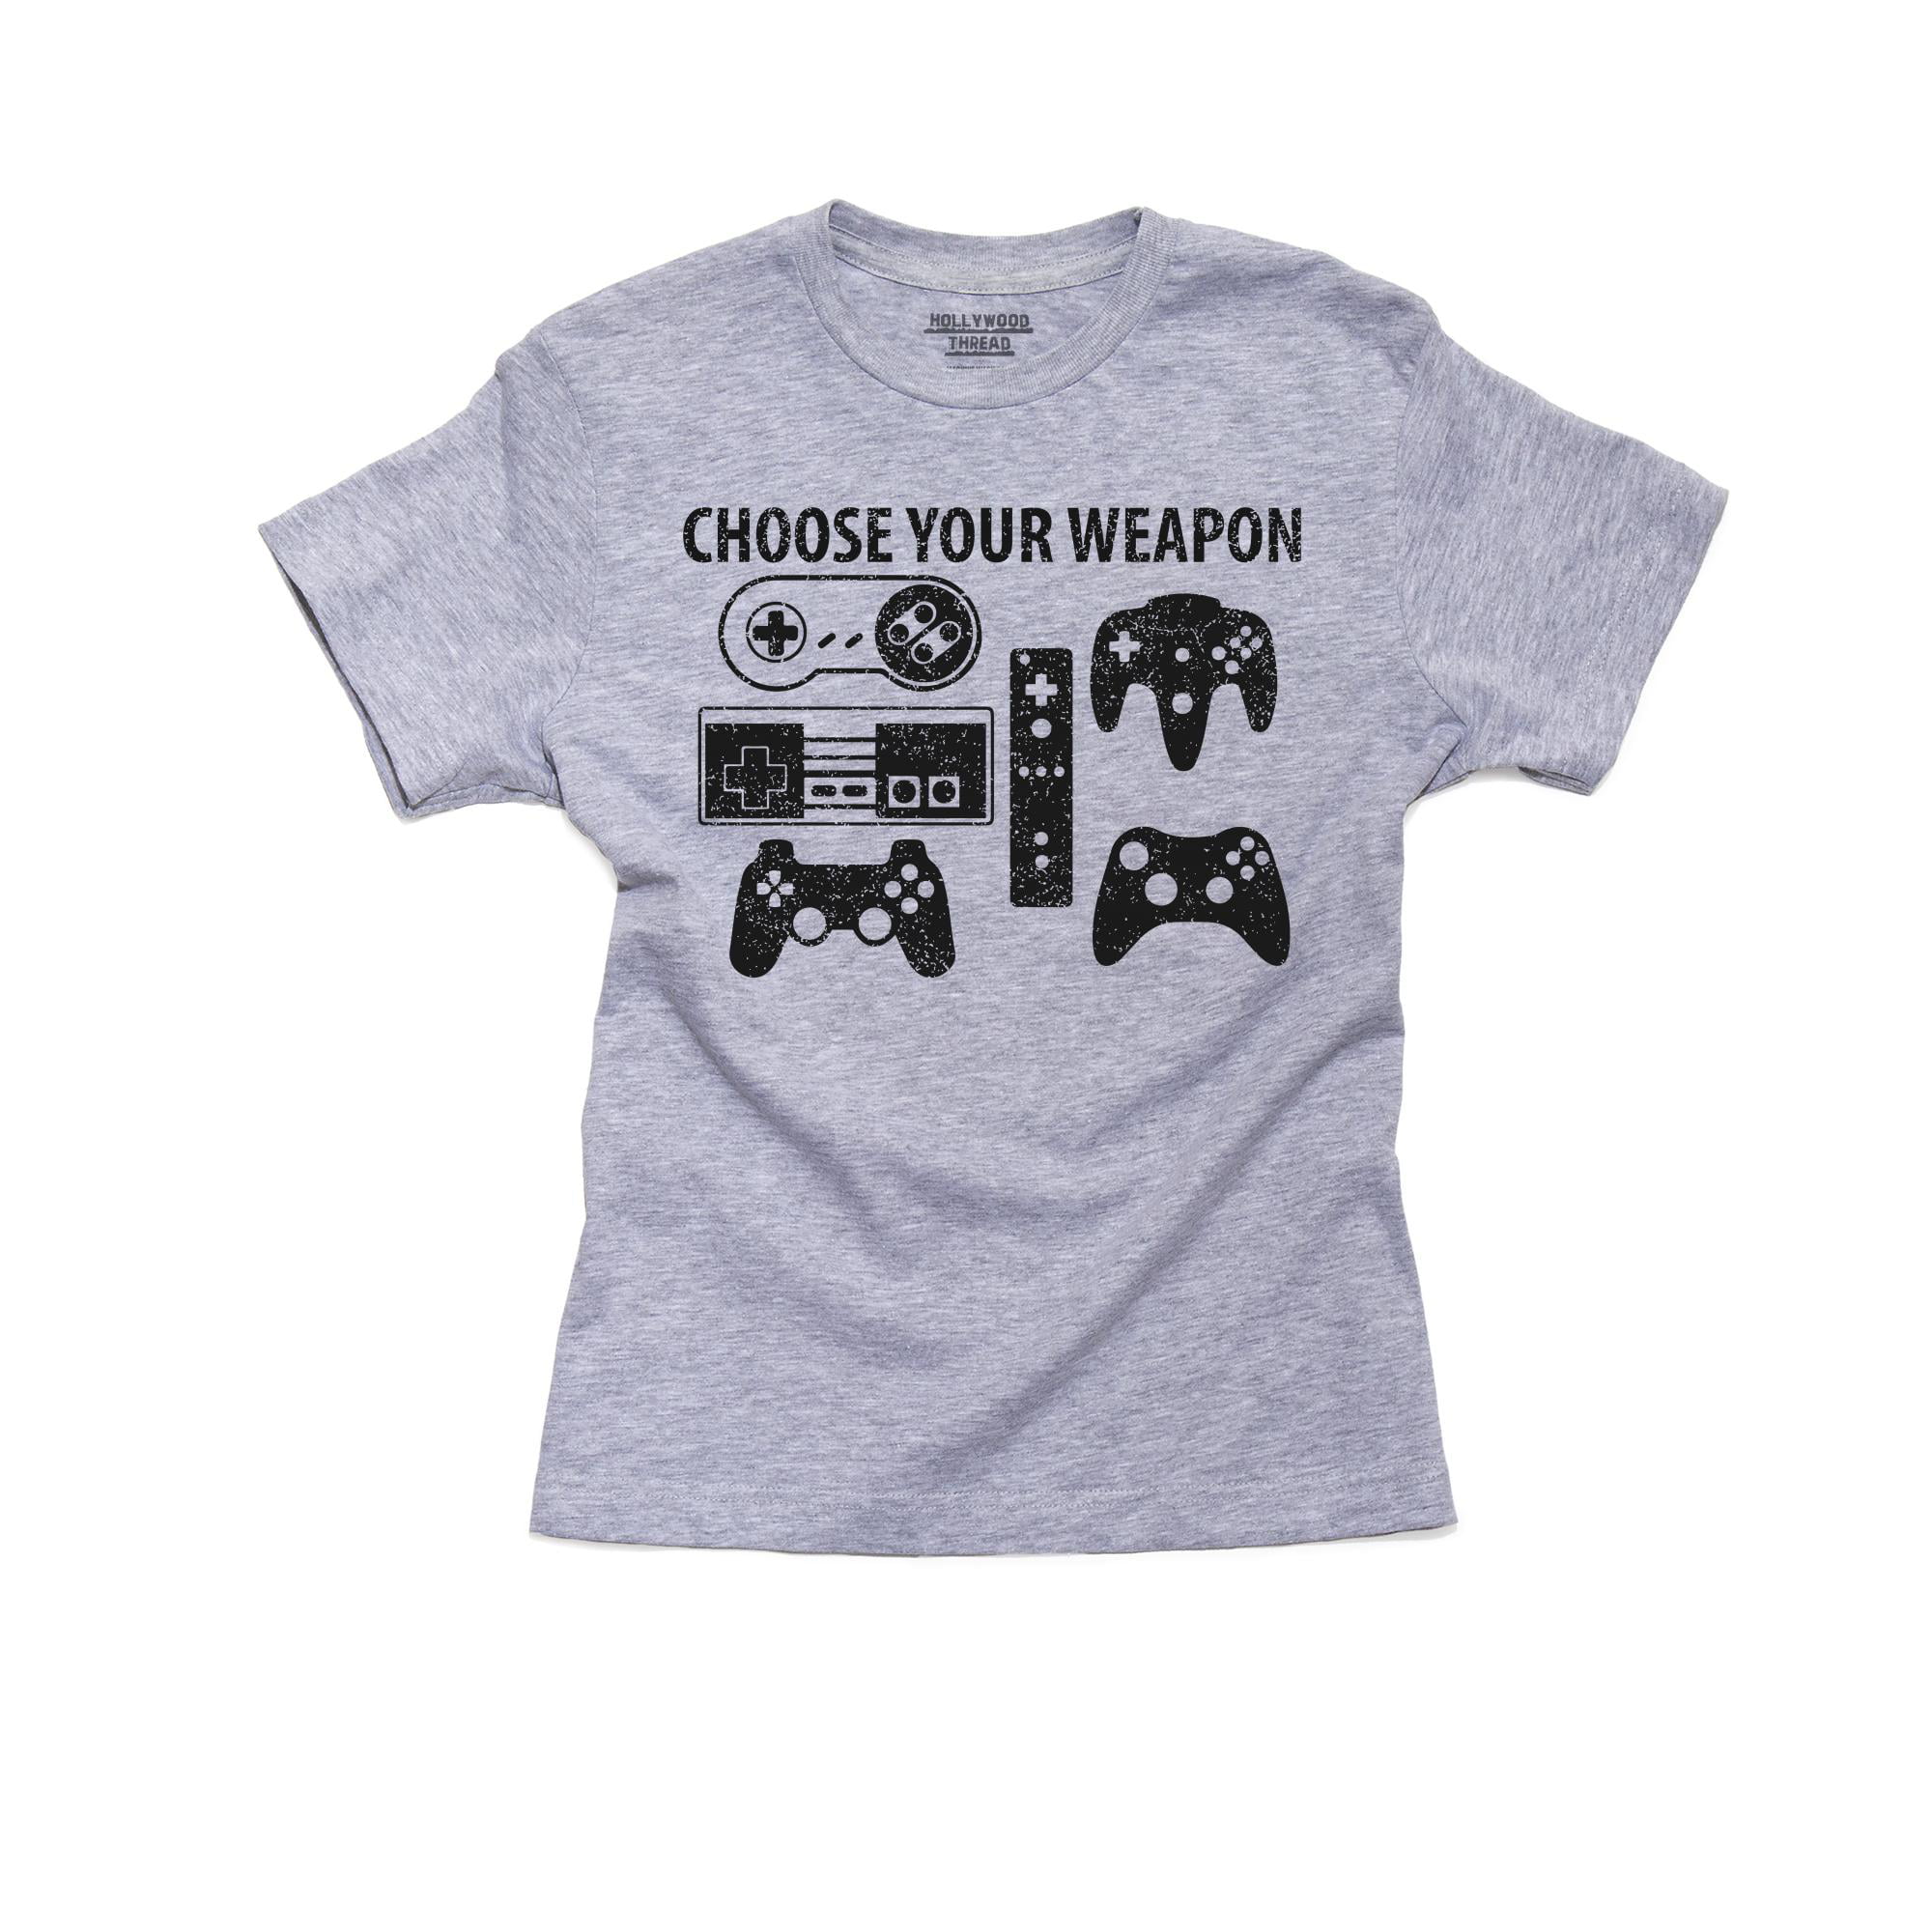 Choose Your Game Weapon Child Cotton Hoody Newest Long Sportwear 